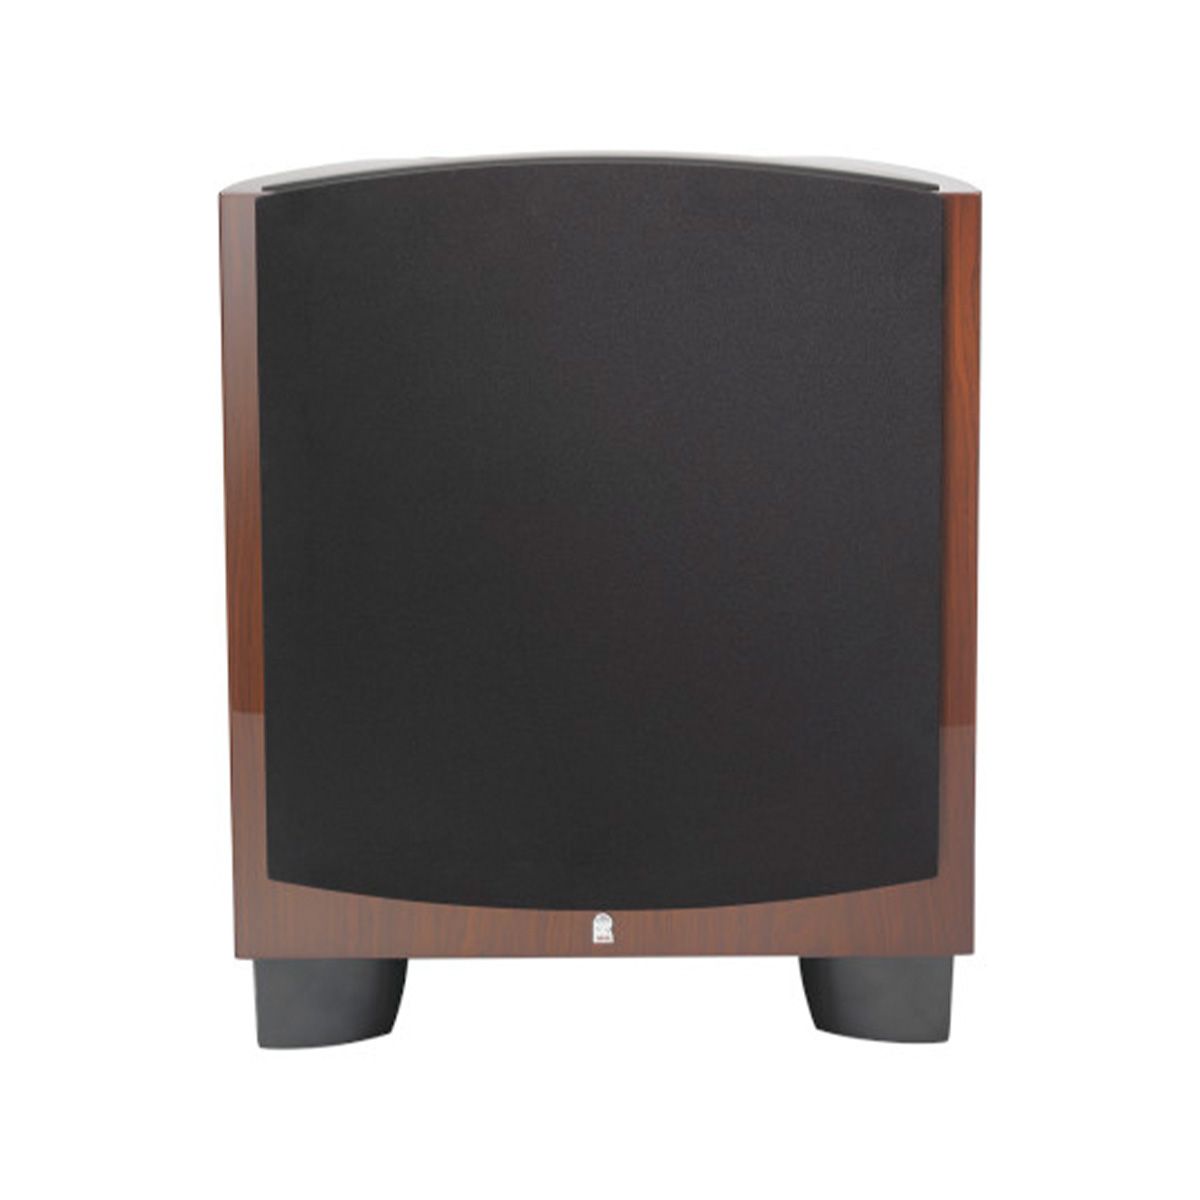 Revel B112v2 12” 1000W Powered Subwoofer - walnut single with grille - front view